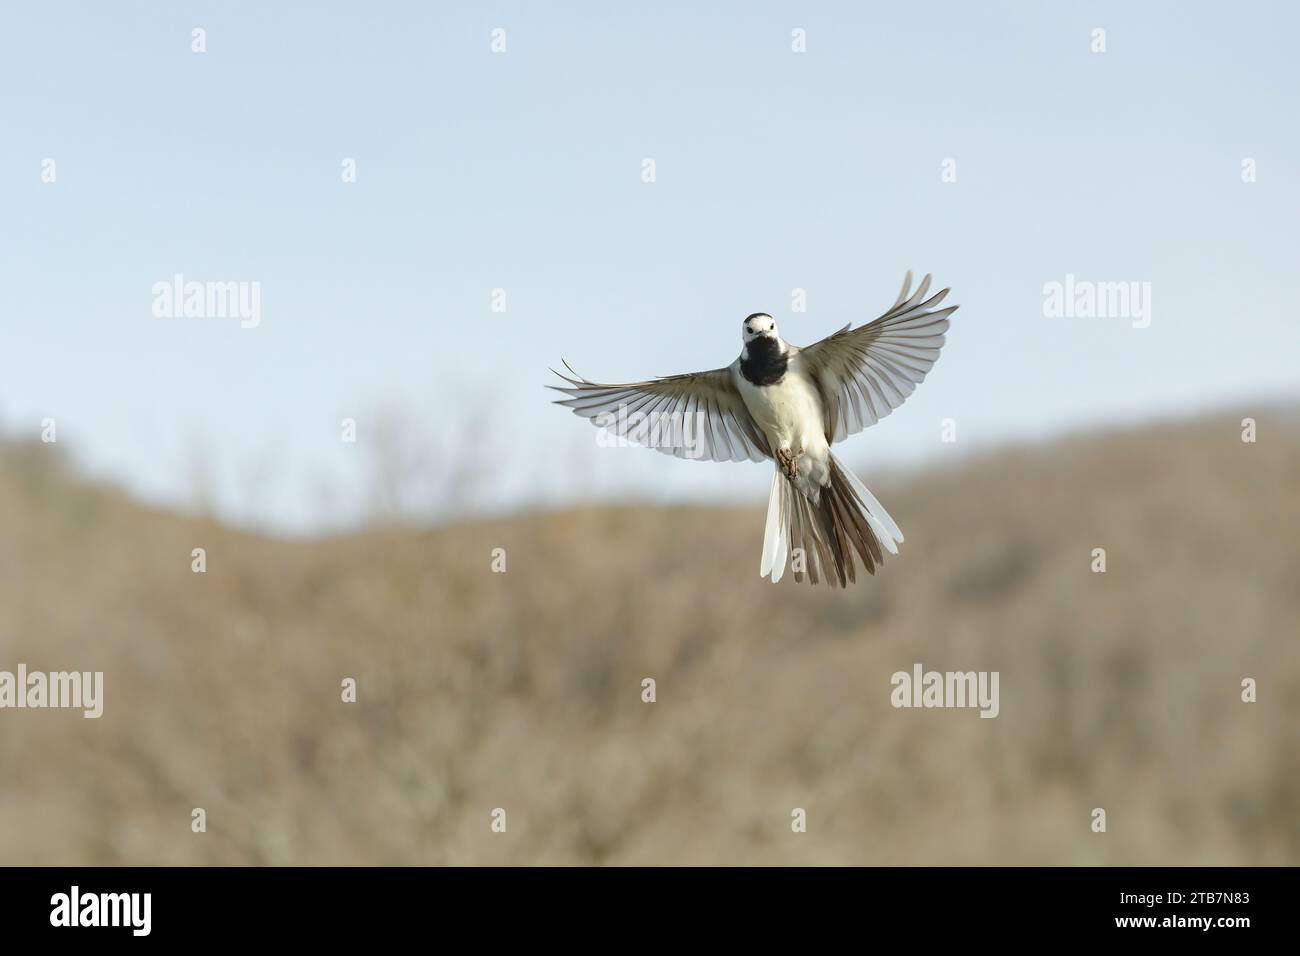 A delicate white wagtail bird is captured in the midst of flight, its wings perfectly extended as it glides through the air against a soft, earthy bac Stock Photo